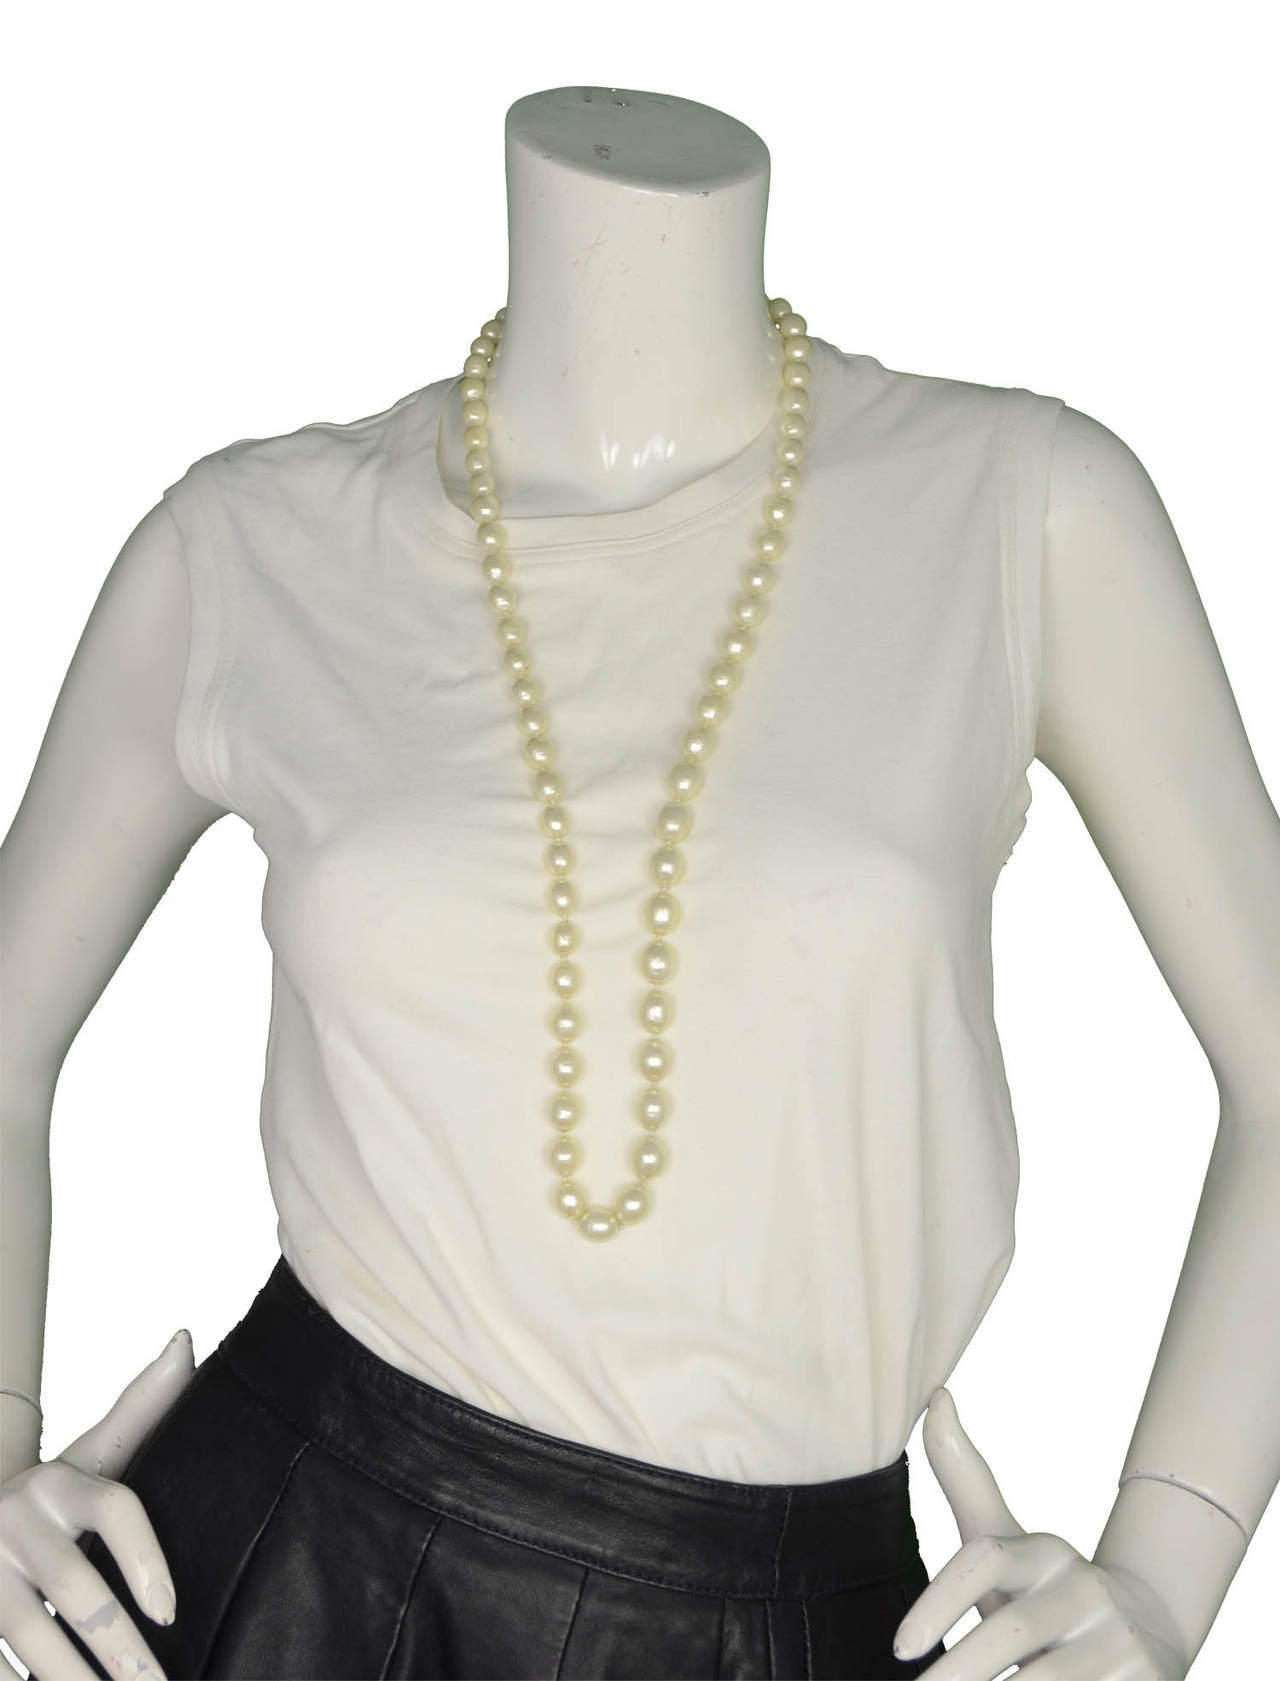 Women's CHANEL Vintage '87 Graduated Pearls Single Strand Necklace